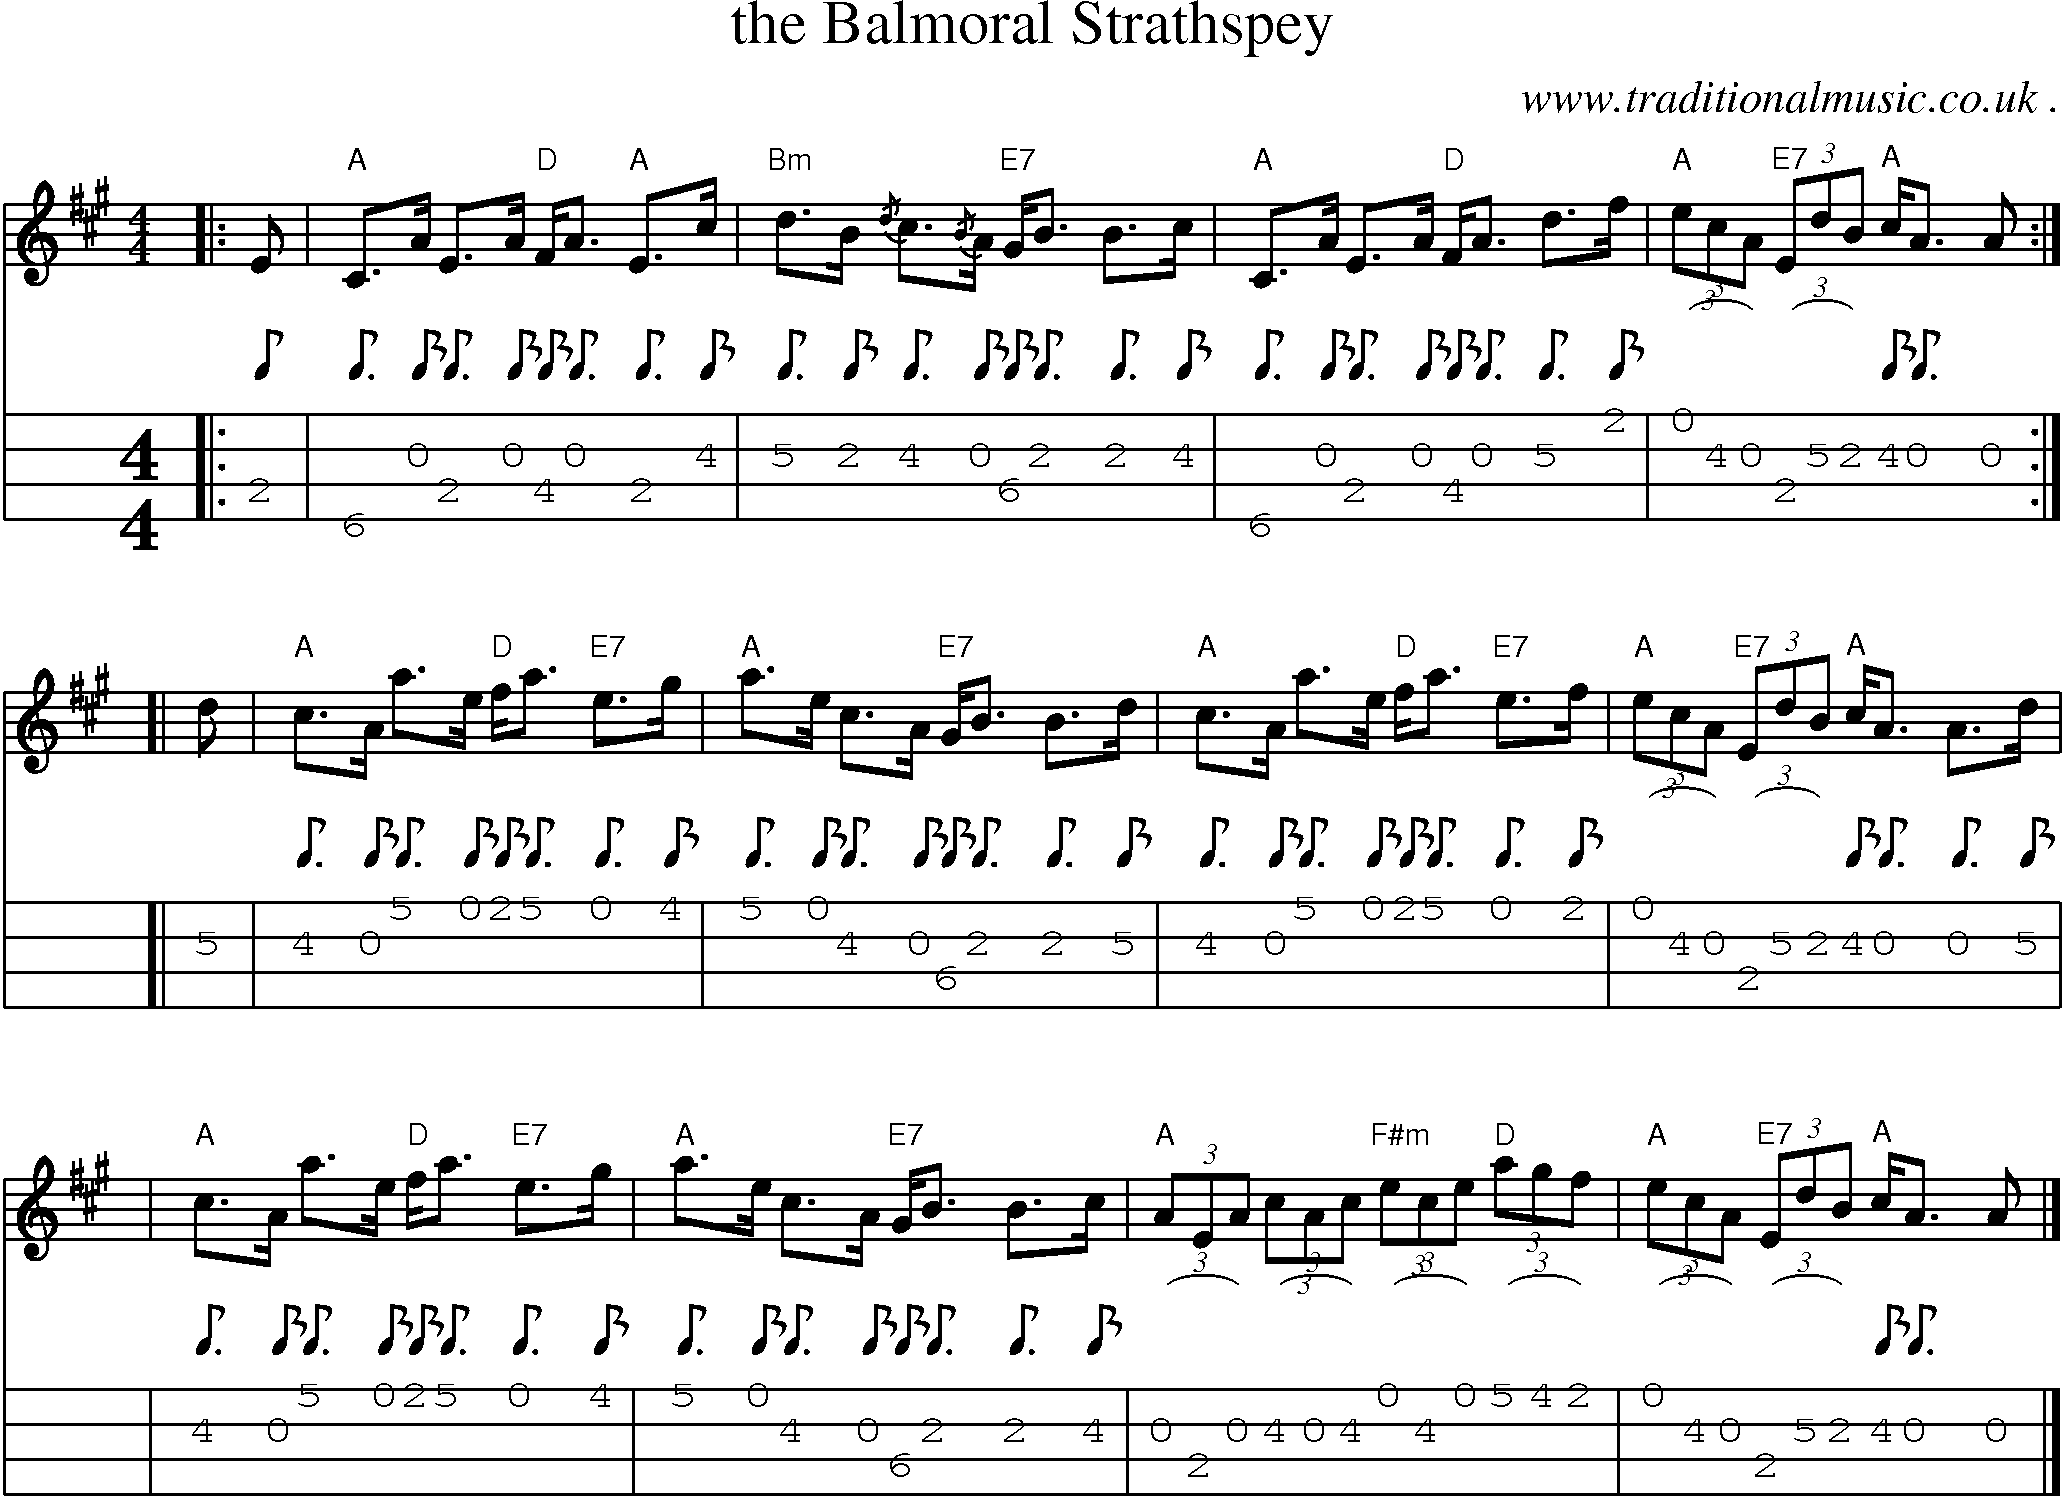 Sheet-music  score, Chords and Mandolin Tabs for The Balmoral Strathspey